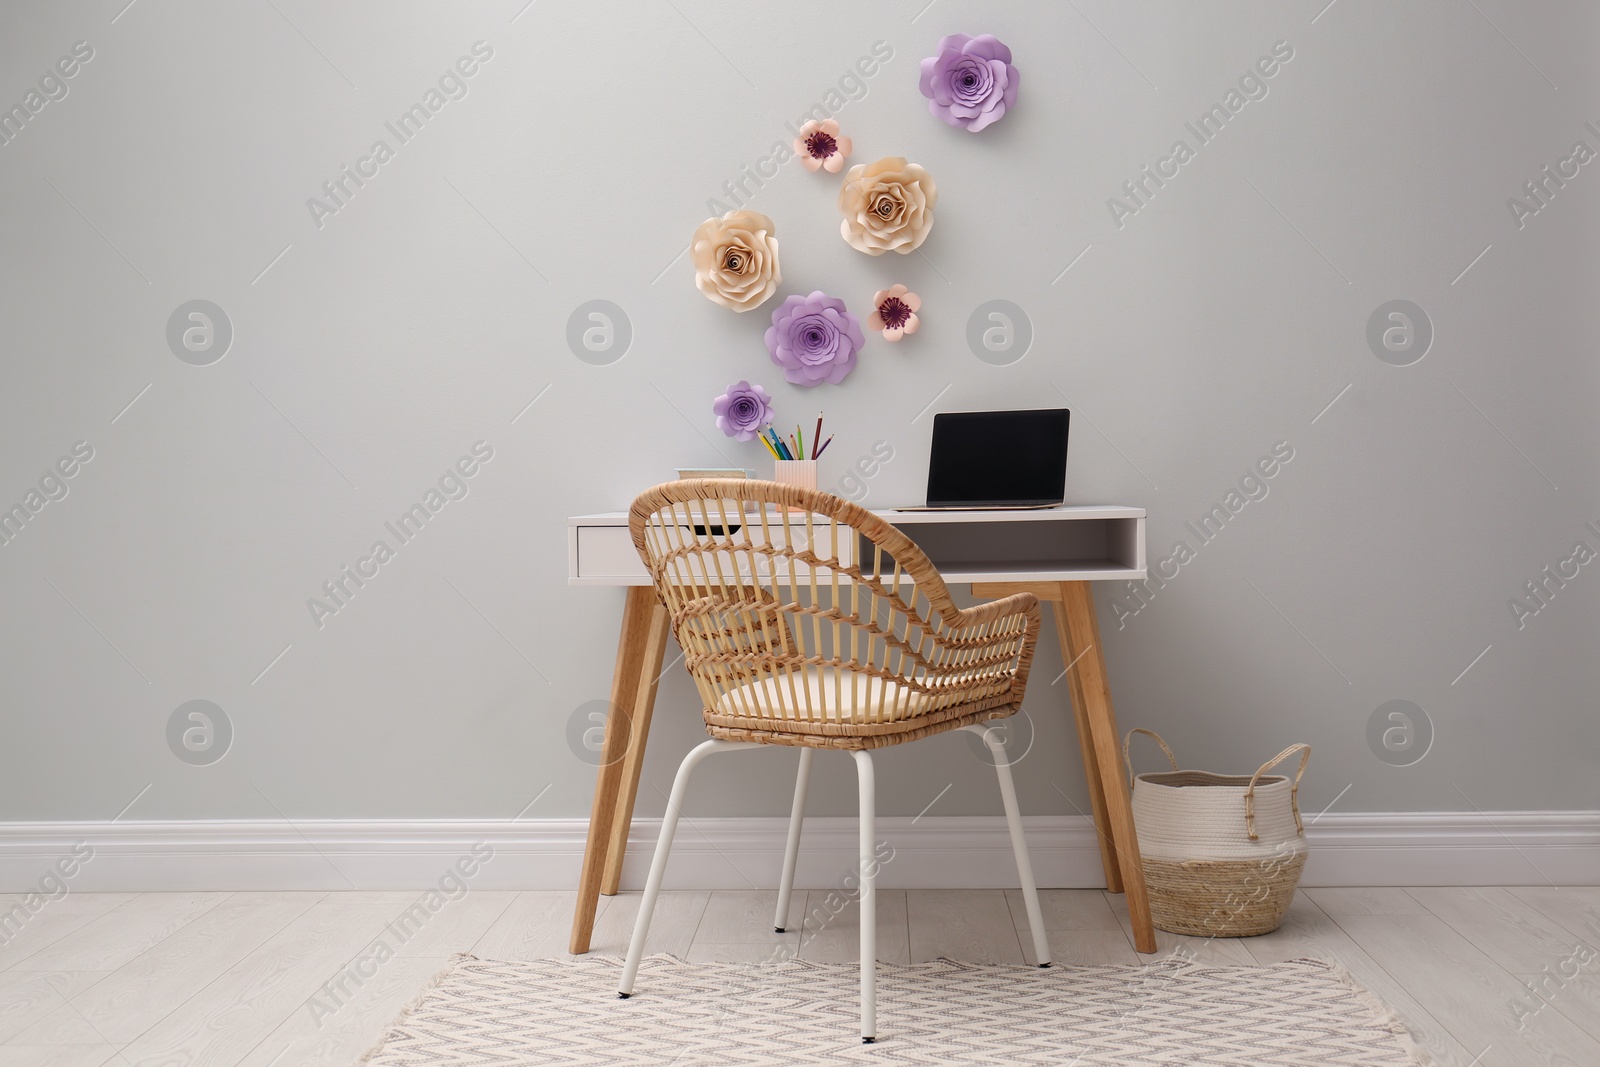 Photo of Stylish room interior with floral decor and modern furniture